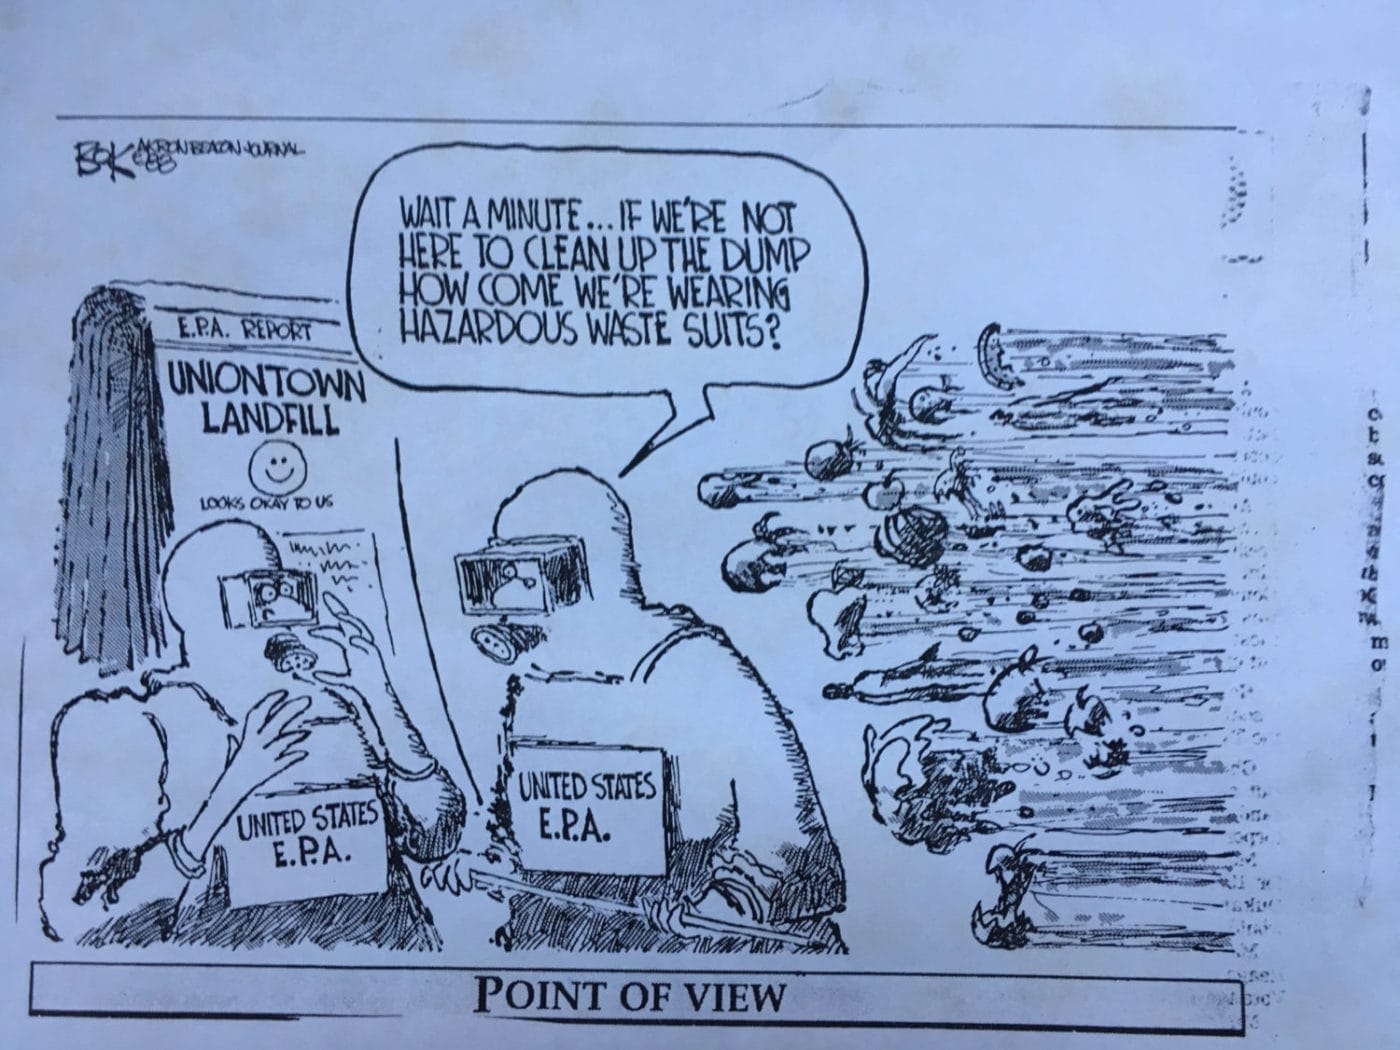 Industrial-Excess-Landfill-cartoon-from-1988-Akron-Beacon-Journal-1400x1050, 2020 hindsight brings corrupted radiation testing into focus at the EPA – Part 4, News & Views 